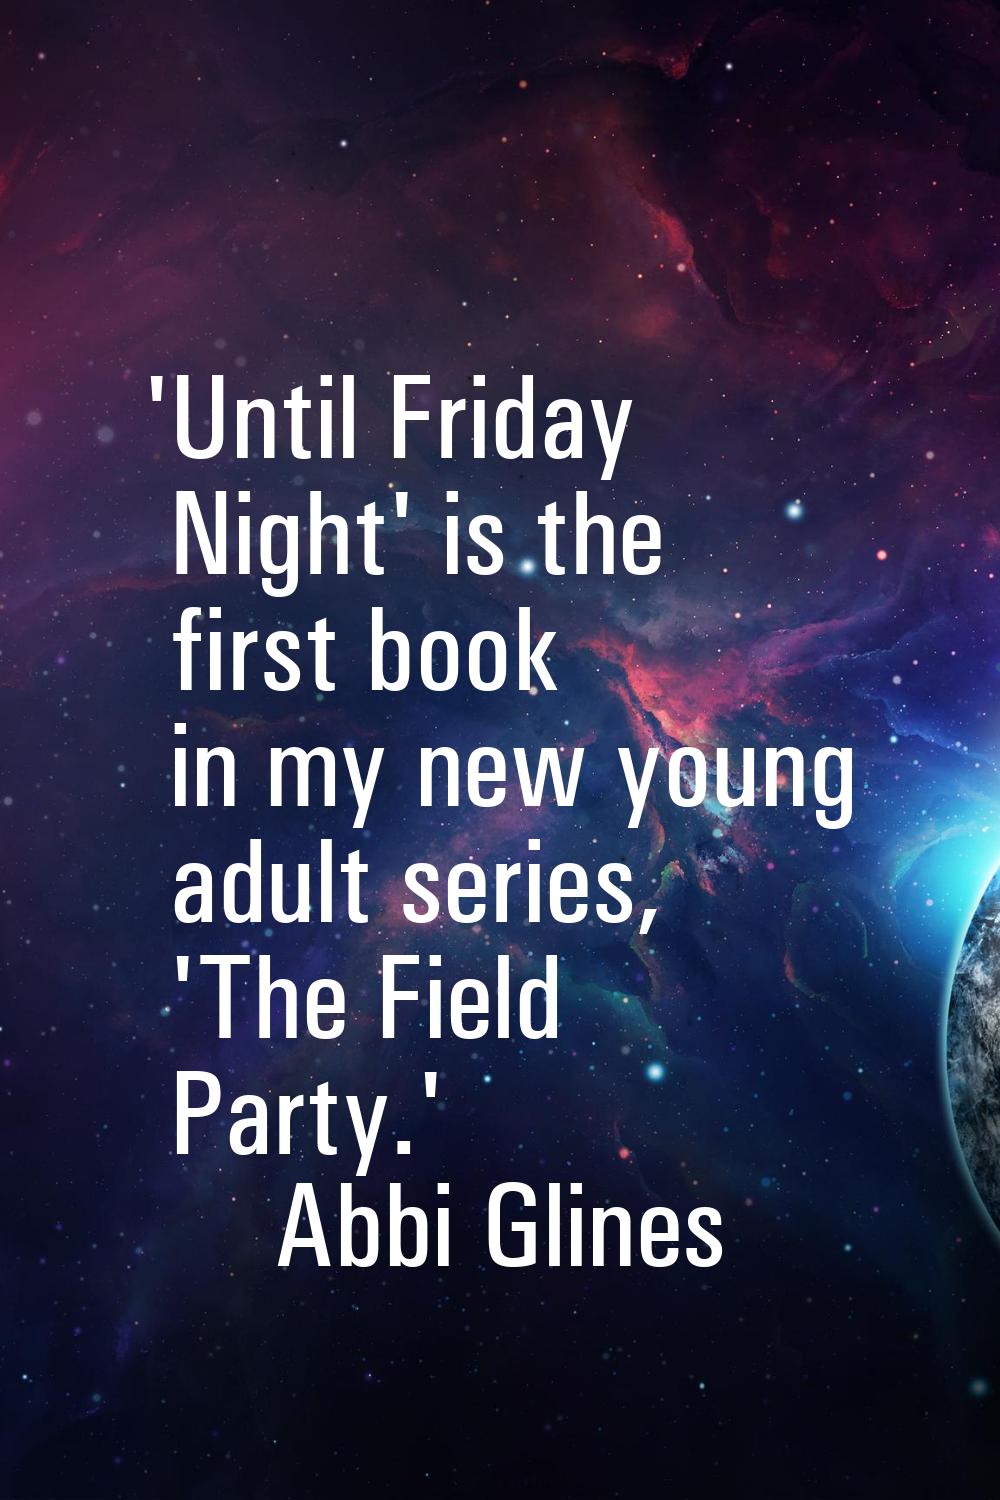 'Until Friday Night' is the first book in my new young adult series, 'The Field Party.'